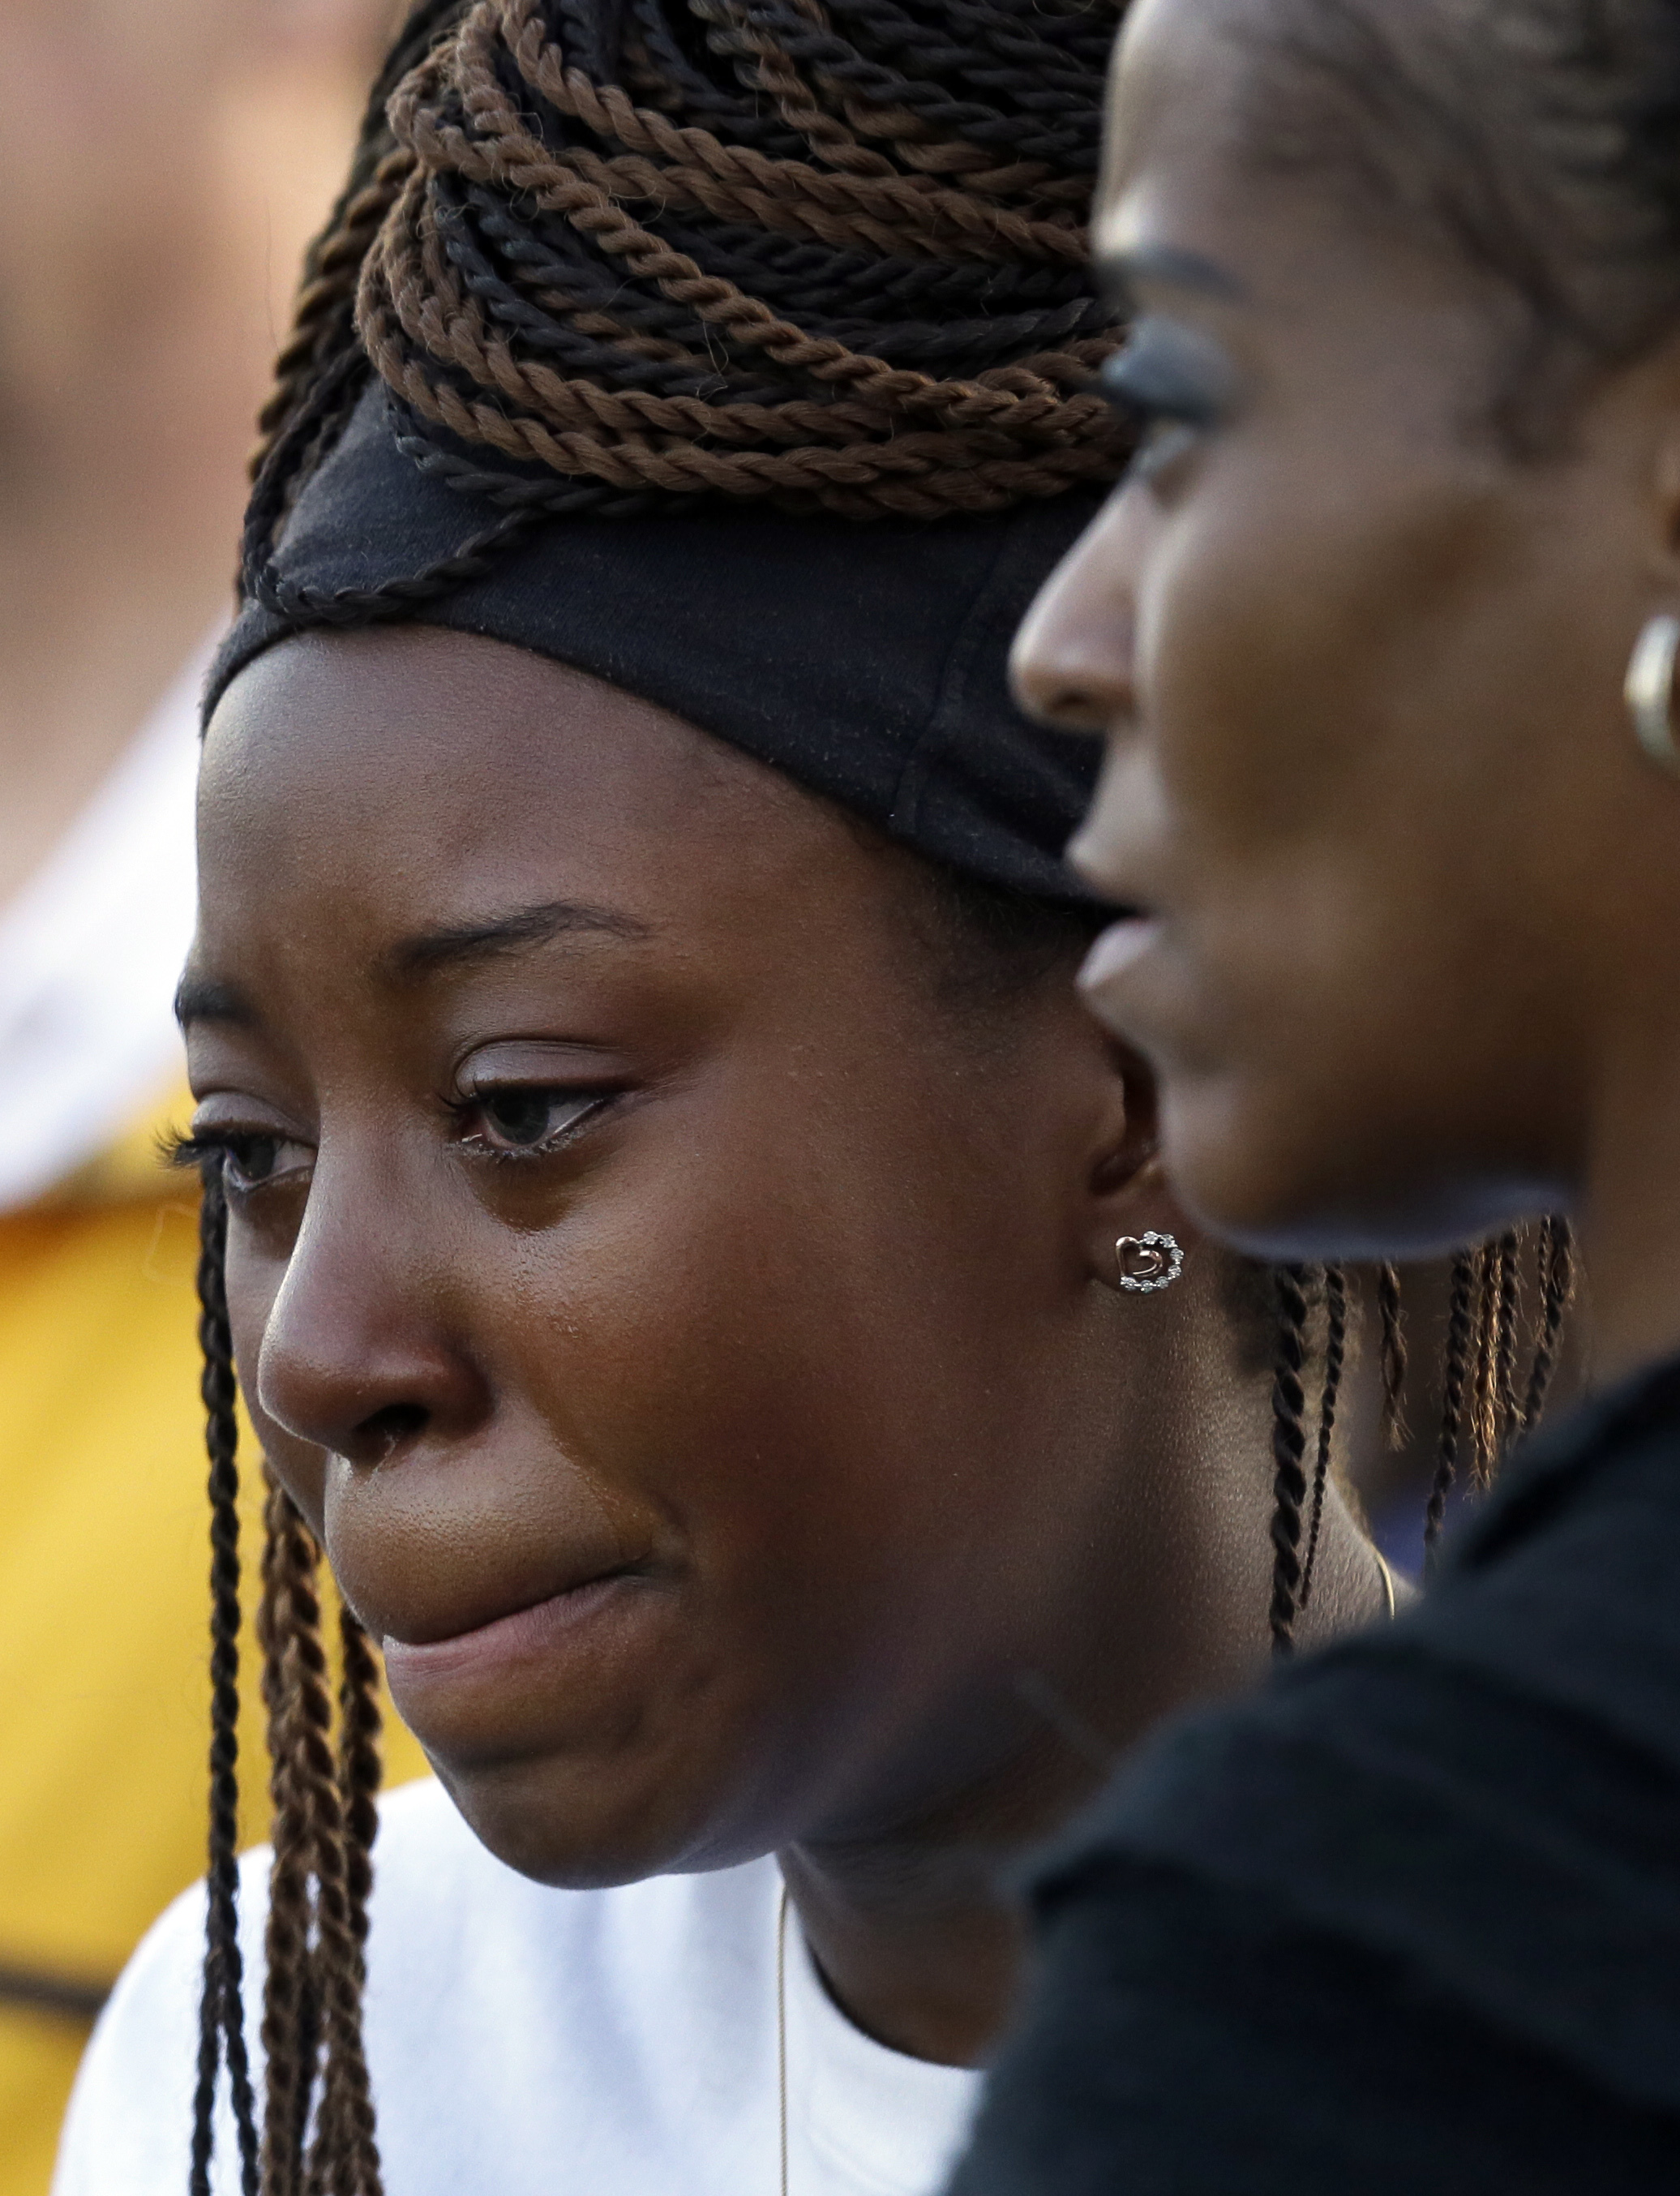 "Ashuntae Coleman, 14, left, cries as her mother Demetria Brown, right, embraces her during a candle light vigil for Jordan Edwards in Balch Springs, Texas, Thursday, May 4, 2017. "